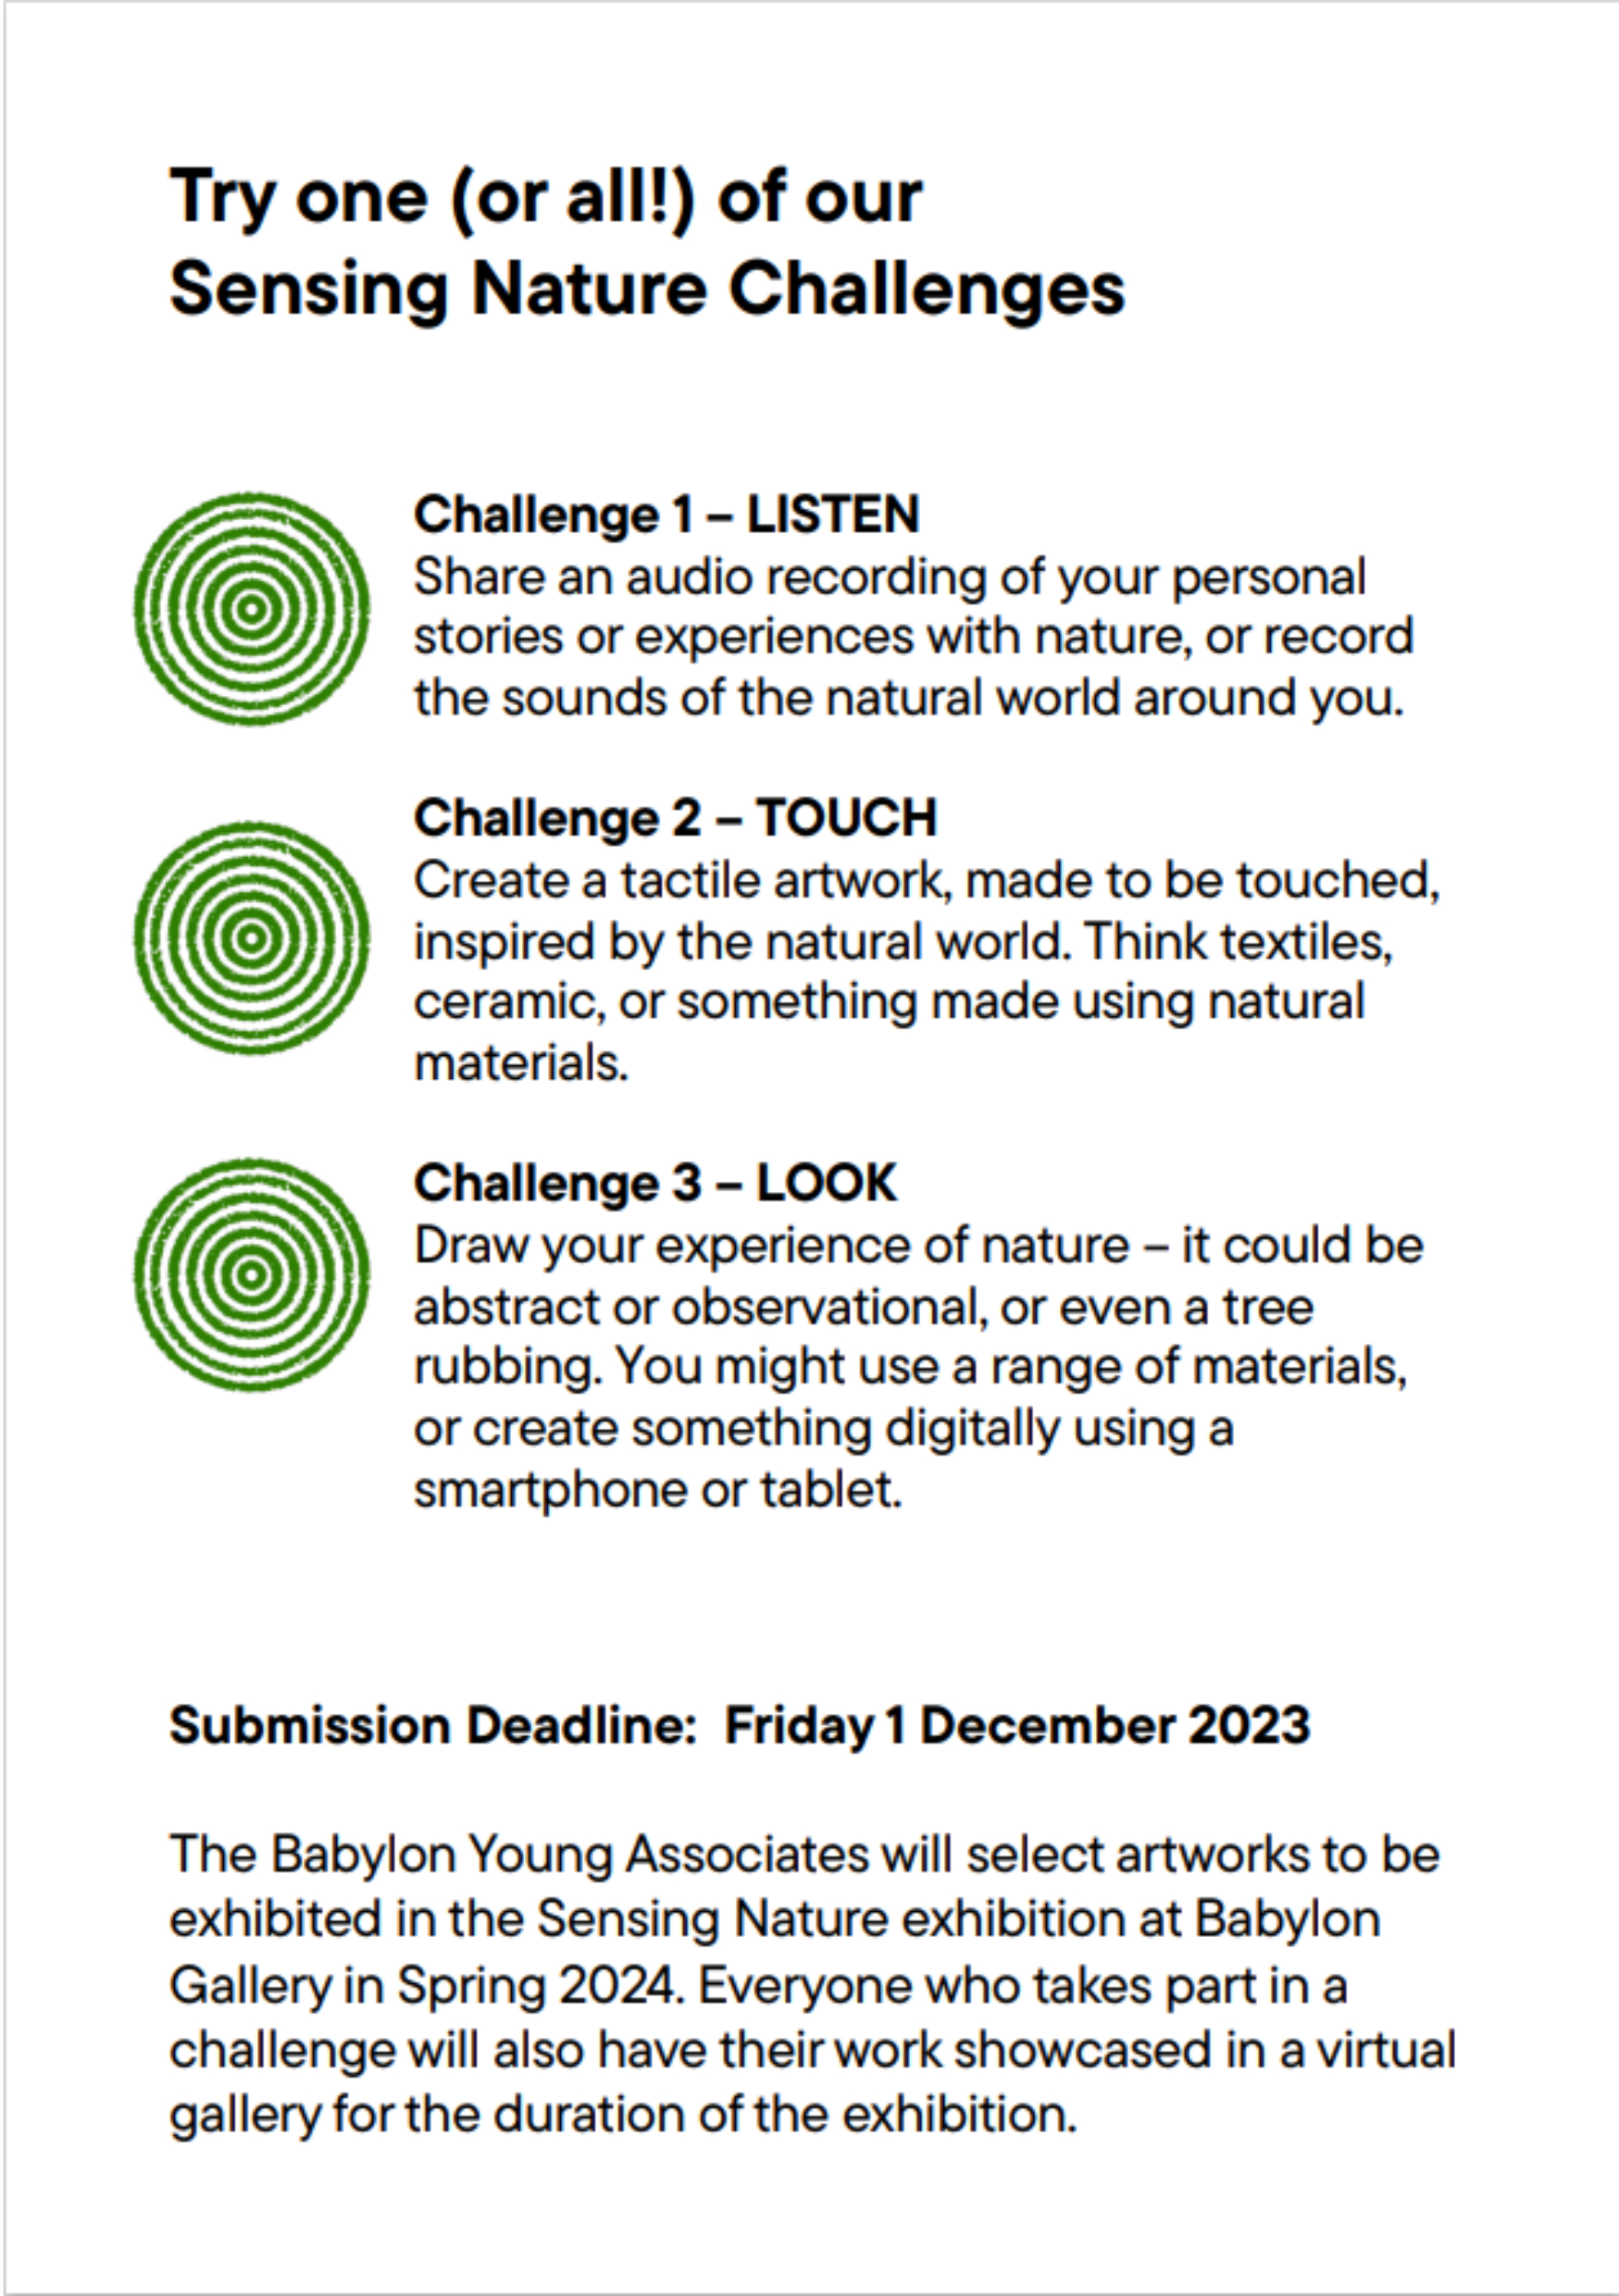 Try one (or all!) of our Sensing Nature Challenges  Challenge 1 – LISTEN Share an audio recording of your personal stories or experiences with nature, or record the sounds of the natural world around you. Challenge 2 – TOUCH Create a tactile artwork, made to be touched, inspired by the natural world. Think textiles, ceramic, or something made using natural materials. Challenge 3 – LOOK Draw your experience of nature – it could be abstract or observational, or even a tree rubbing. You might use a range of materials, or create something digitally using a smartphone or tablet.  Submission Deadline: Friday 1 December 2023  The Babylon Young Associates will select artworks to be exhibited in the Sensing Nature exhibition at Babylon Gallery in Spring 2024. Everyone who takes part in a challenge will also have their work showcased in a virtual gallery for the duration of the exhibition.